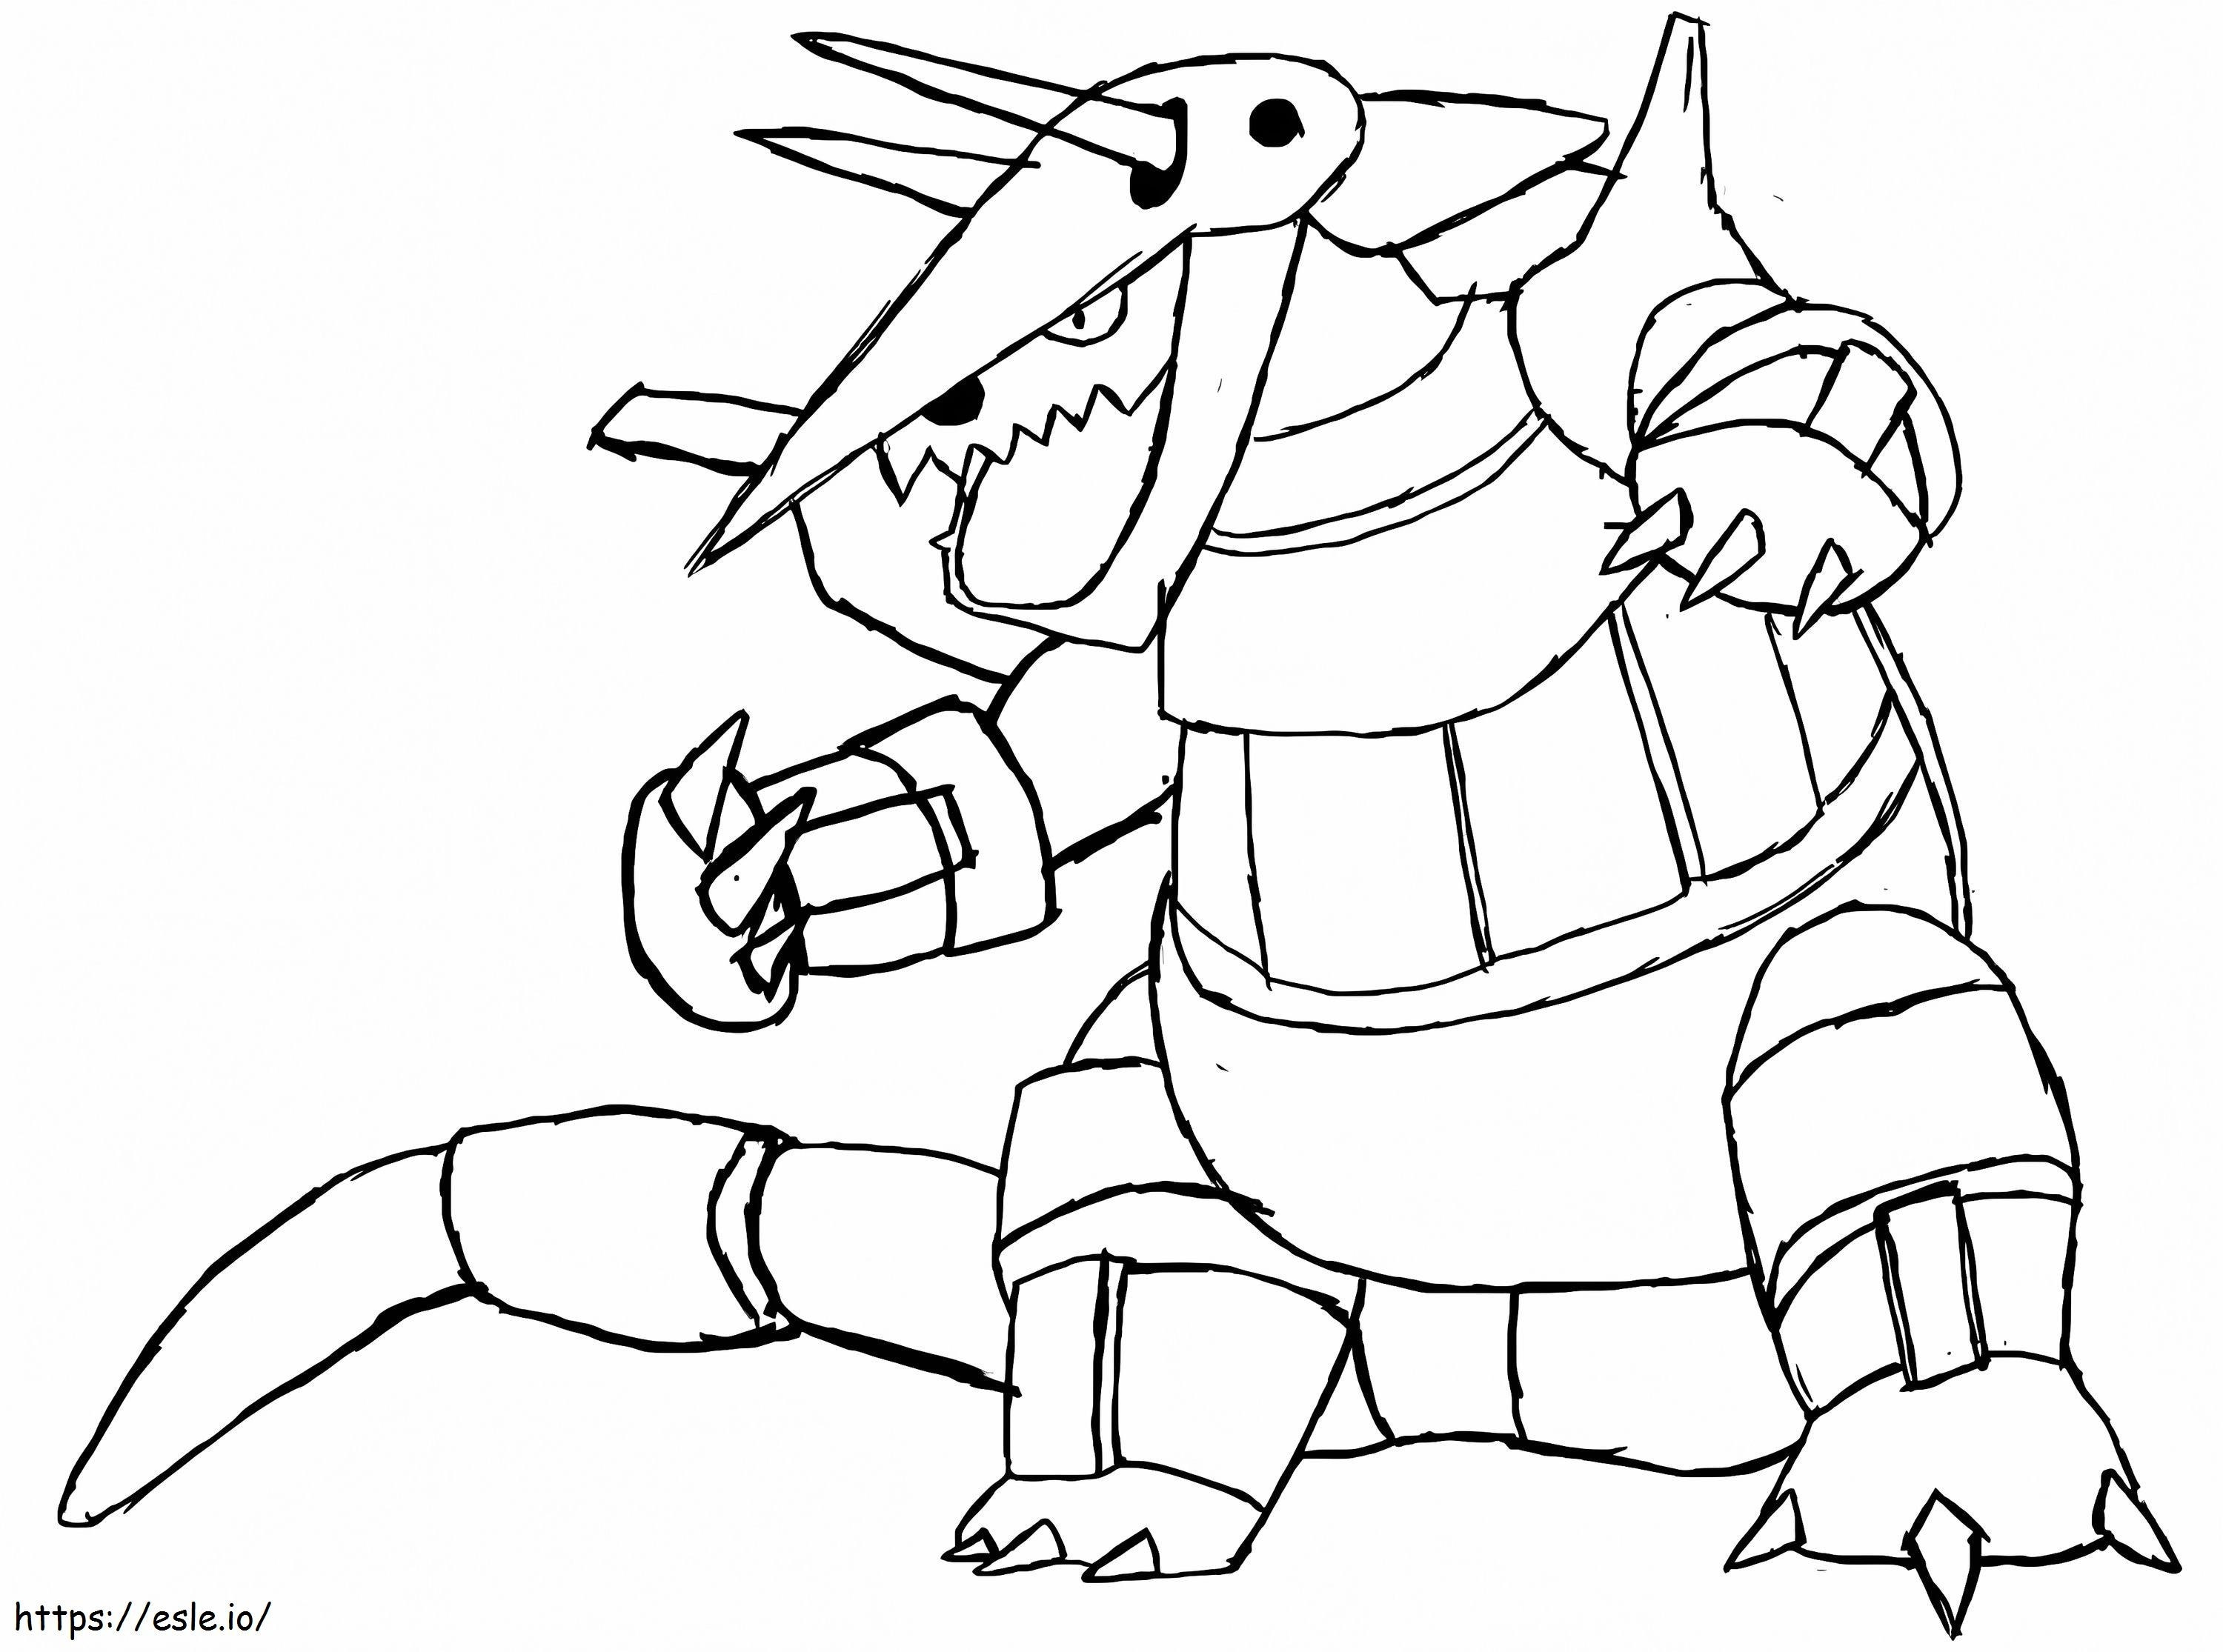 Aggron 3 coloring page